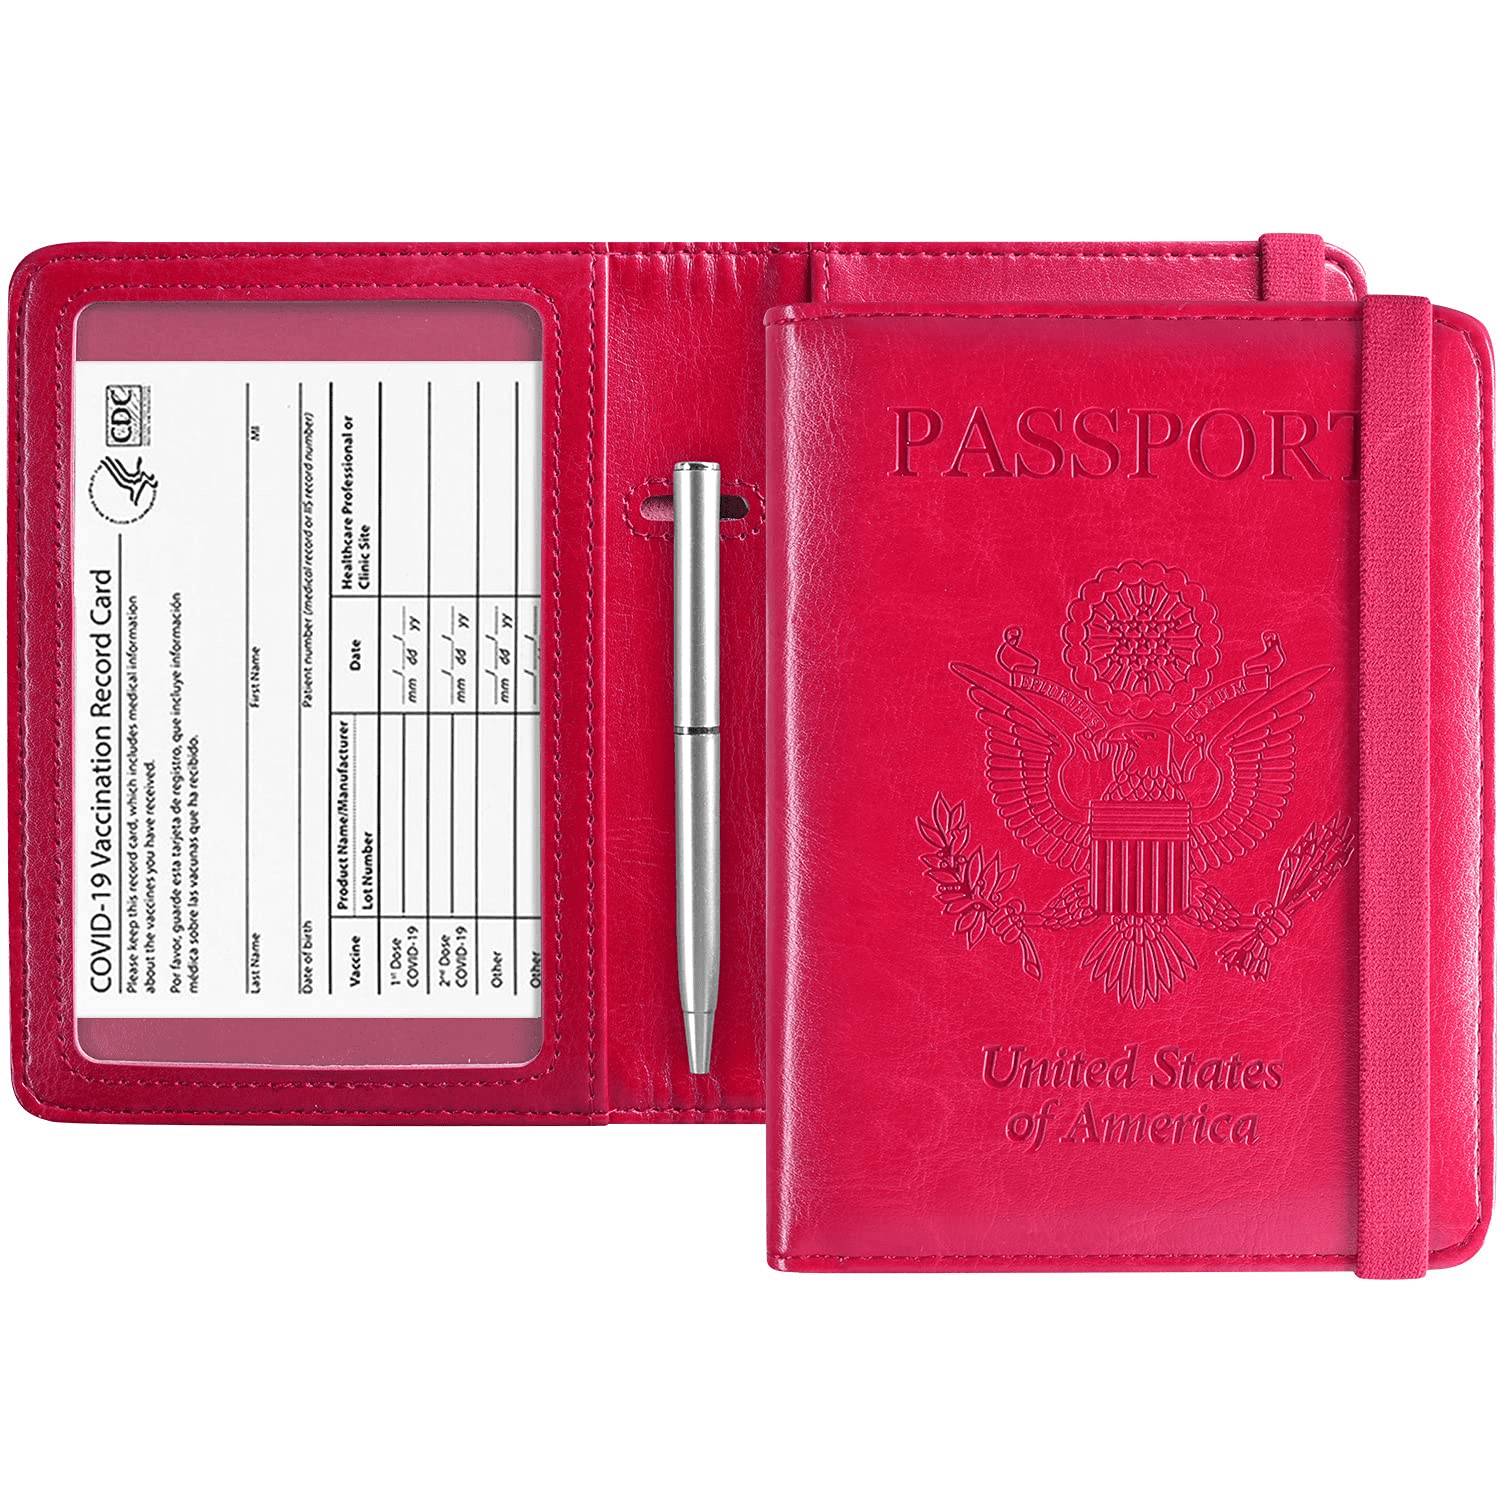 Red with RFID Blocking Cover Case with CDC Vaccination Card Slot Leather Travel Documents Organizer Protector for Men and Women ACdream Passport and Vaccine Card Holder Combo 